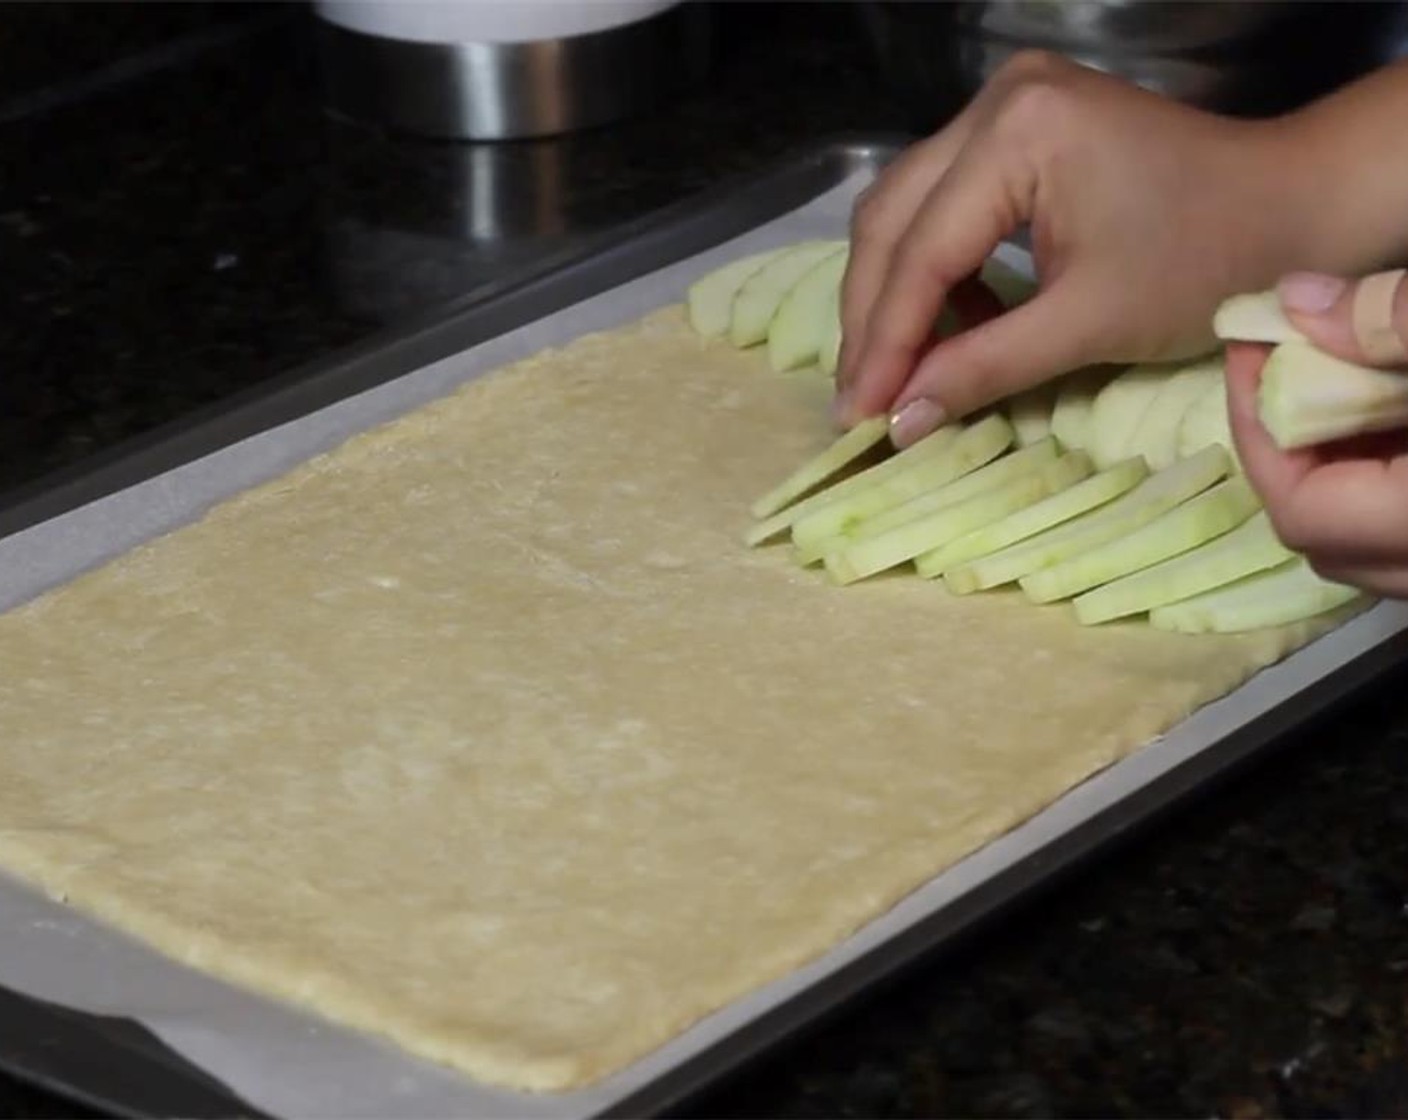 step 11 Place overlapping slices of apples on the crust any way you want until it is completely covered with apple slices, even all the way to the edges, since the apples will shrink in the oven.